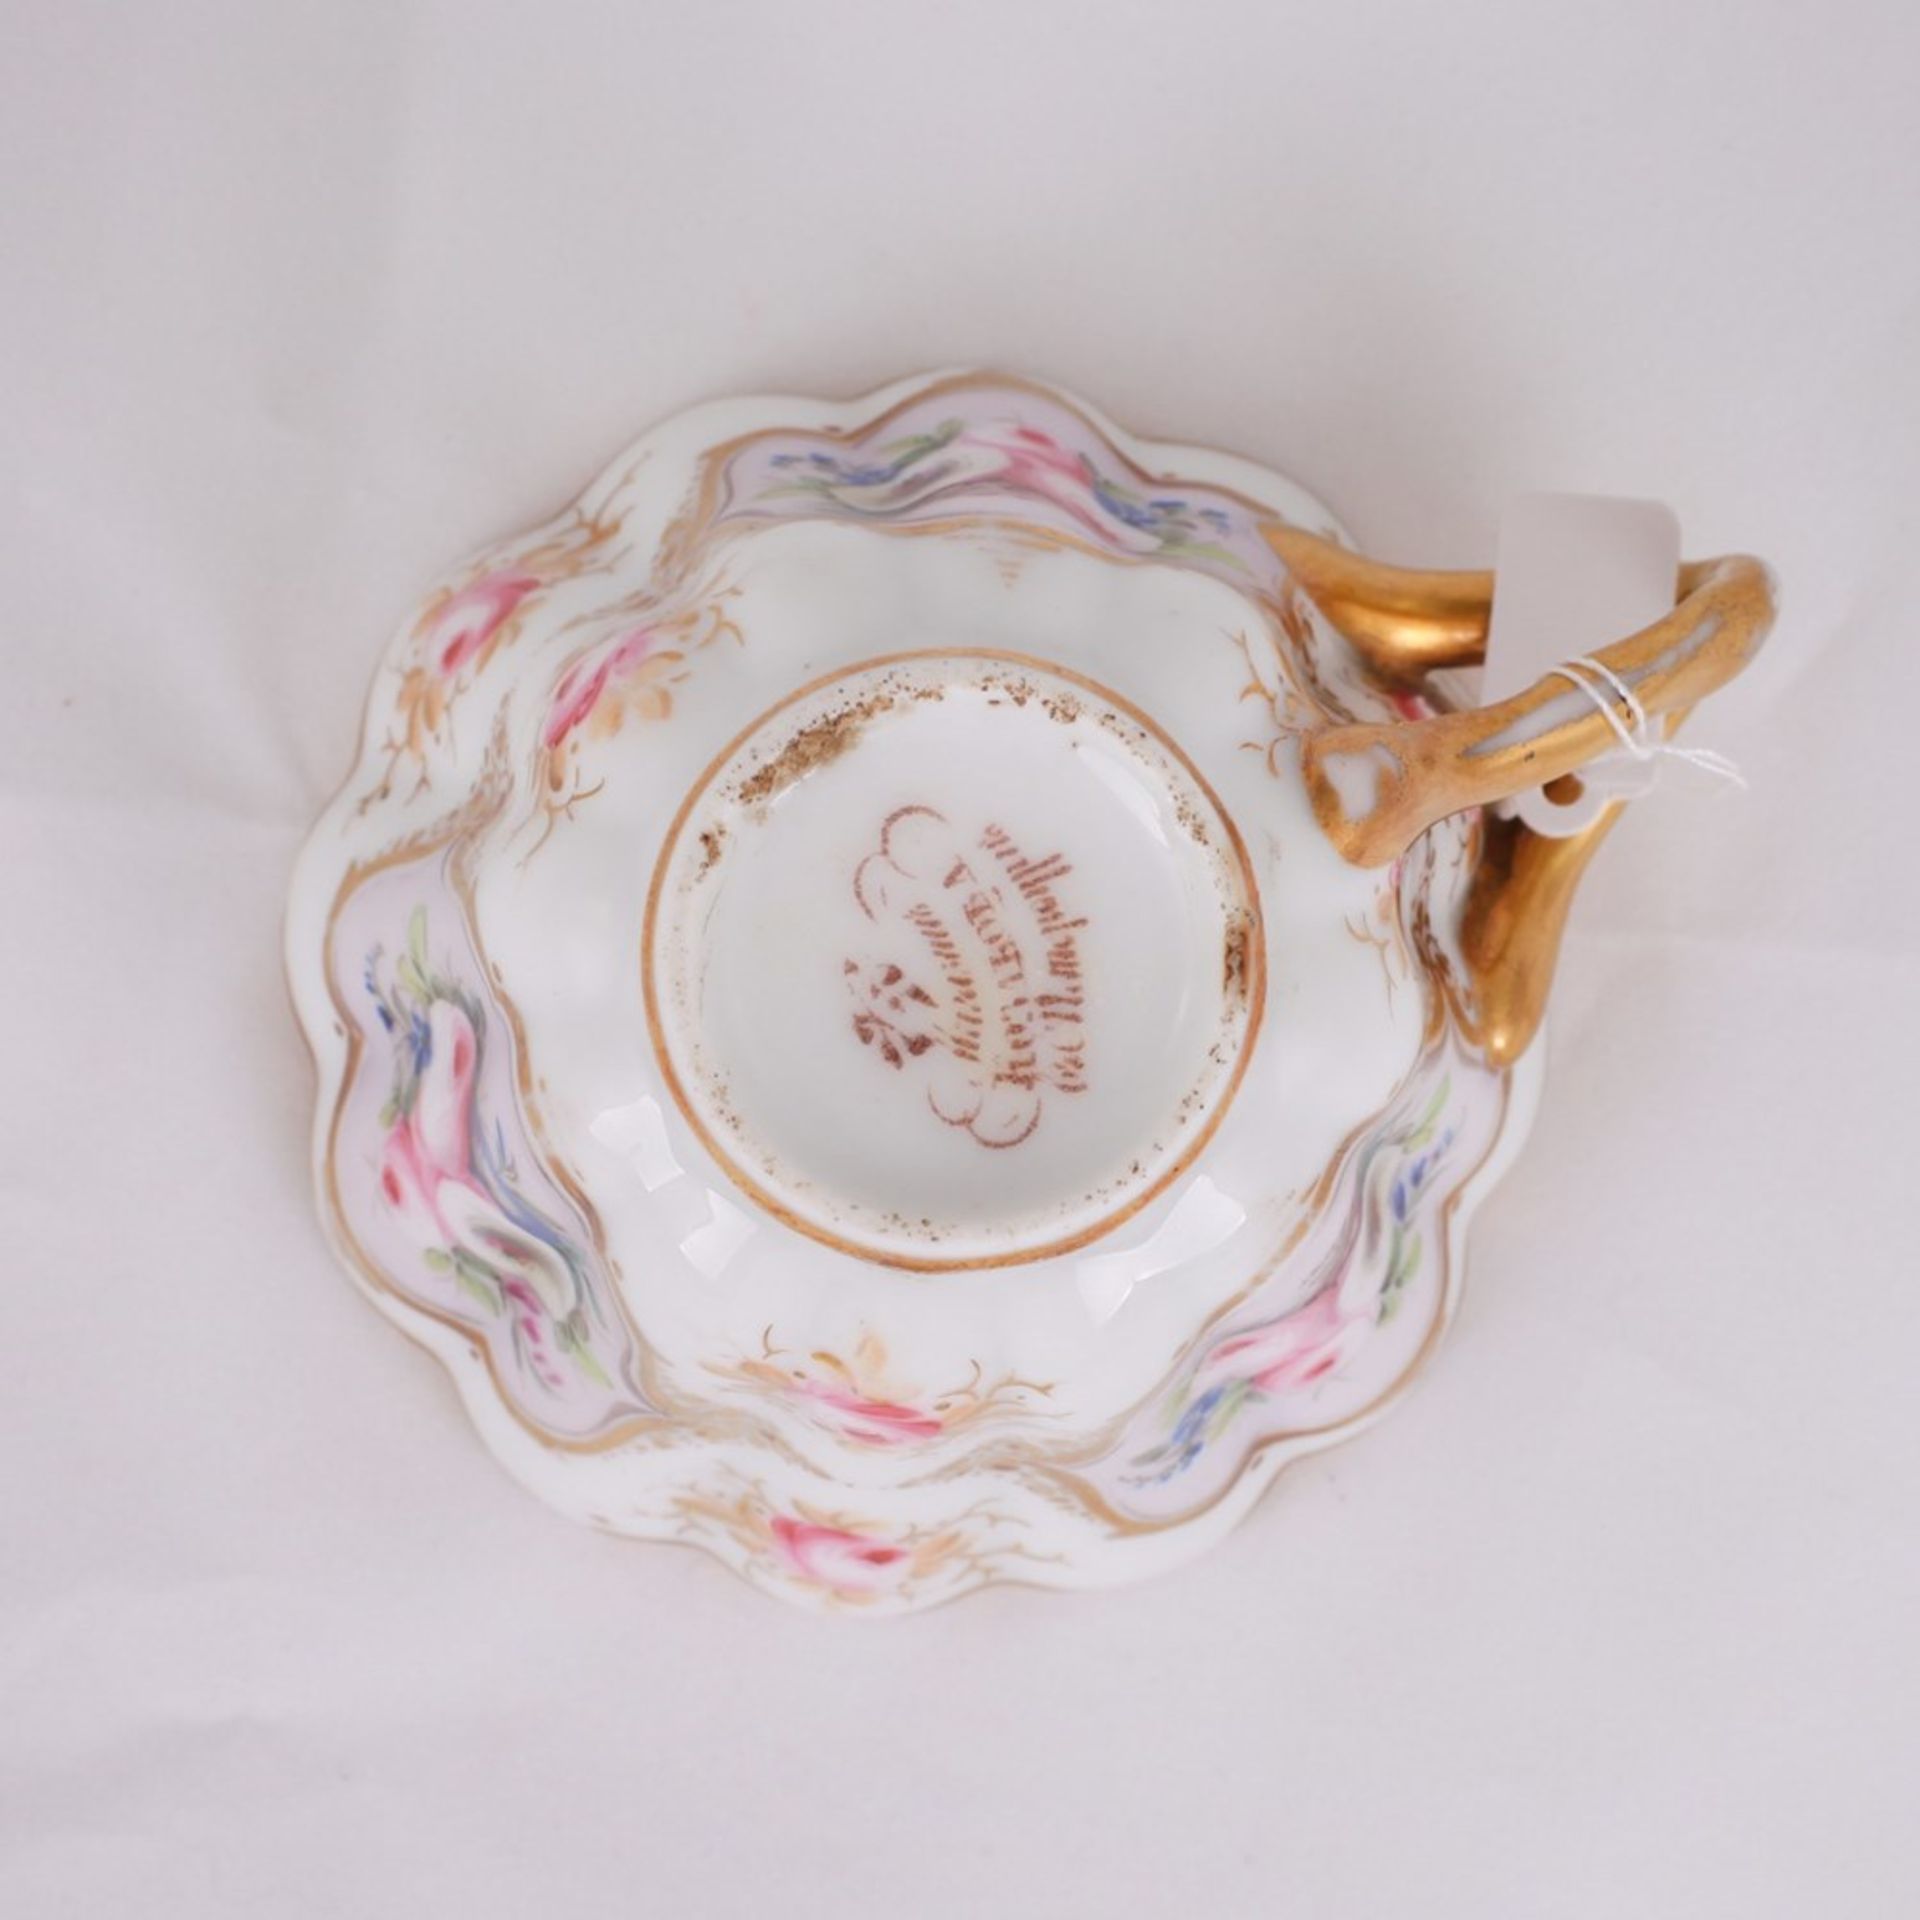 Tea cup and saucer set with flower painting. Kudinov Porceline Factory (?). Russia. 1820s. - Image 10 of 10